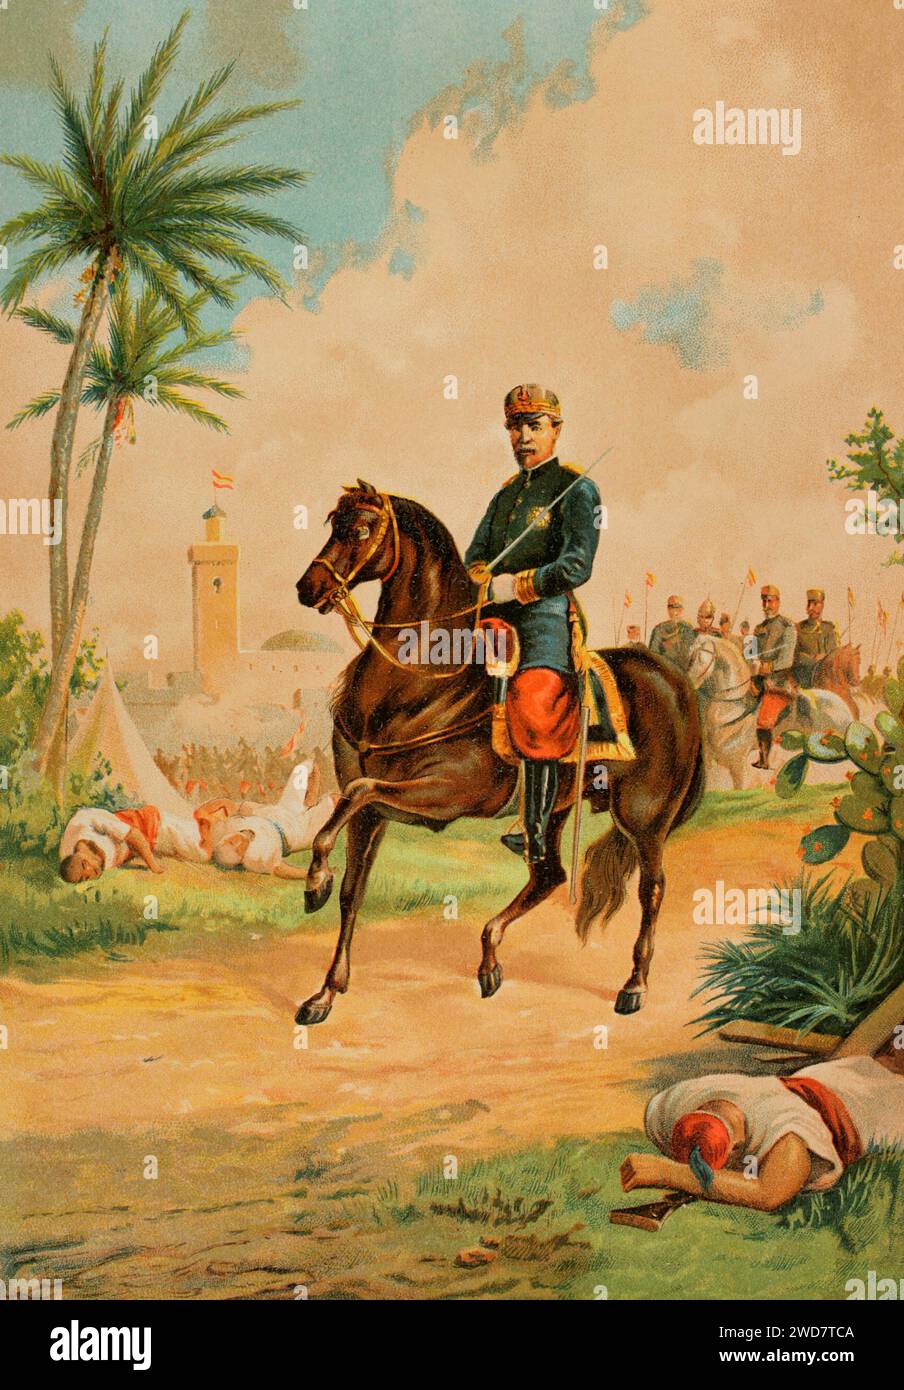 Leopoldo O'Donnell (1809-1867). Spanish military and politician. President of the Spanish government on several occasions after Espartero's Progressive Biennium (18541856). Equestrian portrait on the occasion of his participation in the Hispano-Moroccan War (1859-1860), taking command of his troops at the Battle of Tetuan on 4 February 1860. Chromolithography. "Historia Universal", by César Cantú. Volume X, 1881. Stock Photo